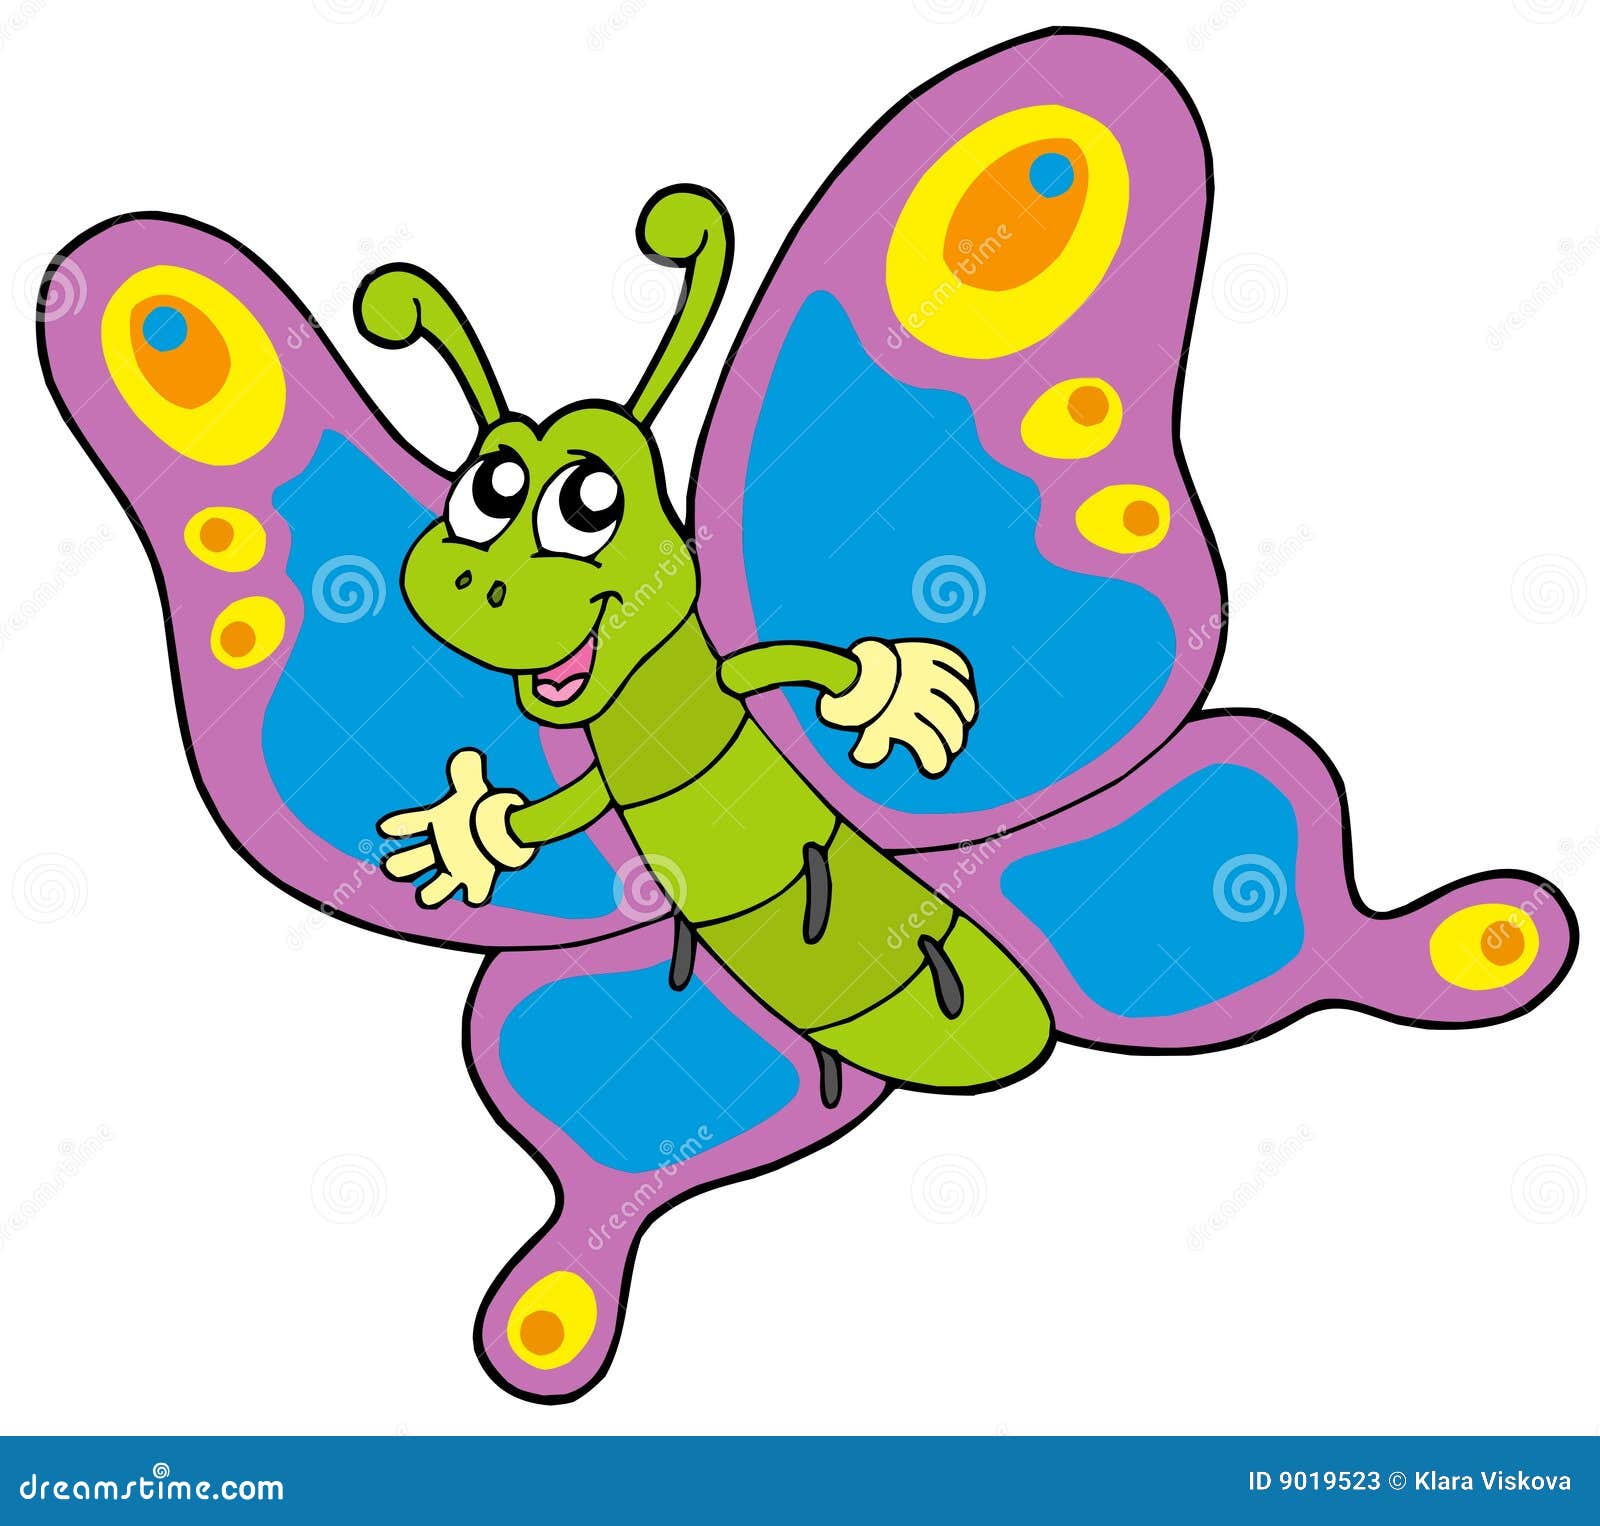 Cute cartoon butterfly stock vector. Illustration of colors - 9019523